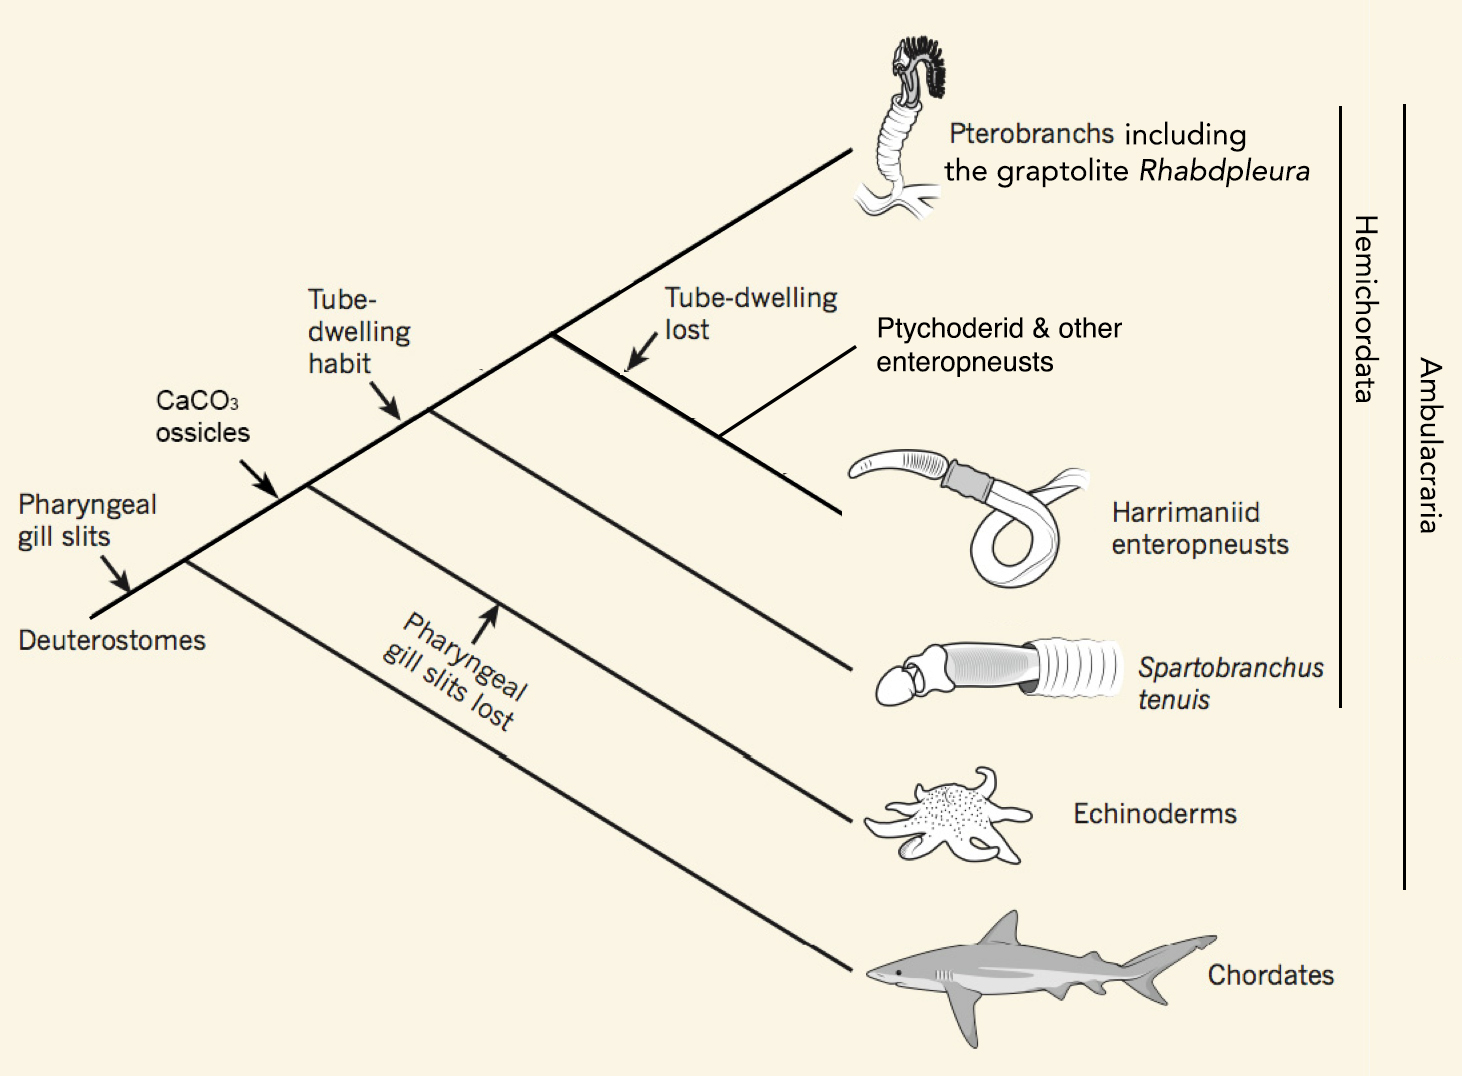 Fig. 1.
        Hypothesis on the origin and evolition of deuterostome gills,
        ambulacrarian ossicles, and hemichordate tubes (modified from
        Gee 2013, Nature)